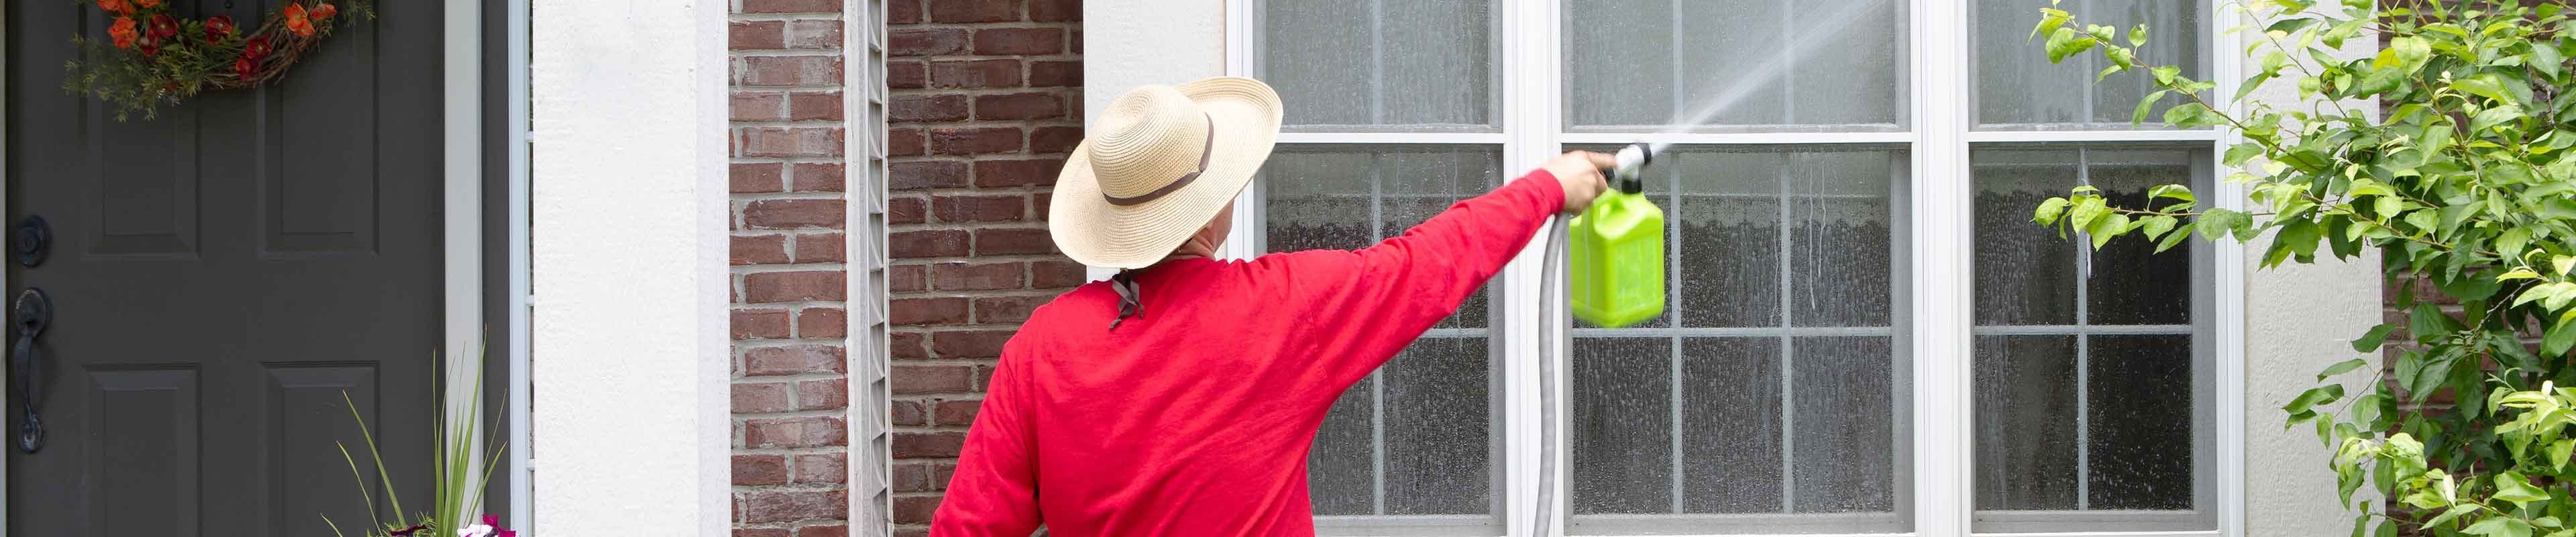 Man spring cleaning the exterior of home.